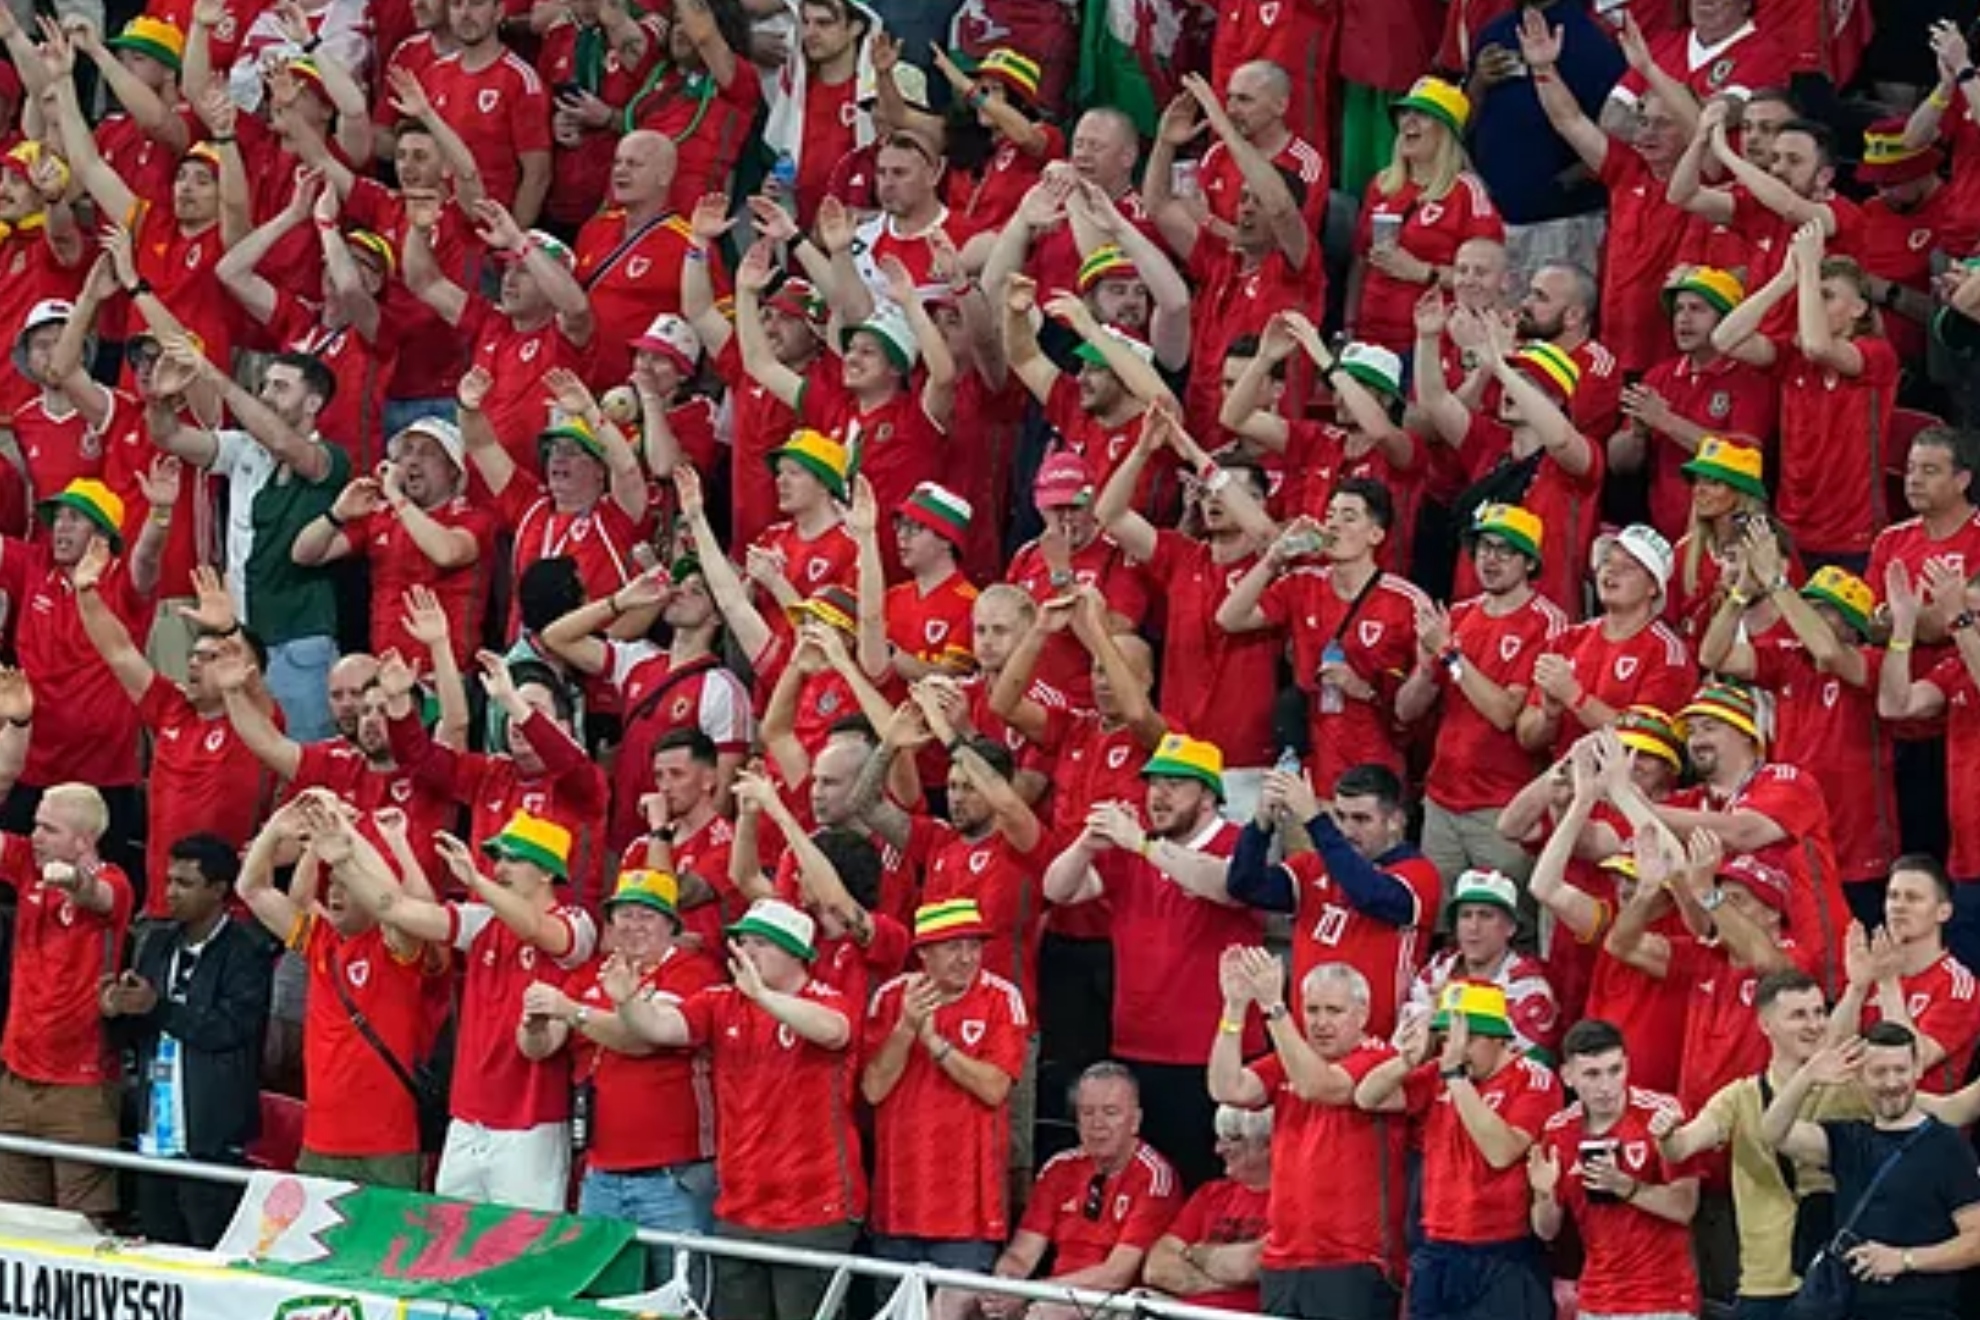 Welsh fans heckle the USMNT by chanting "Mexico, Mexico, Mexico" to throw them off balance